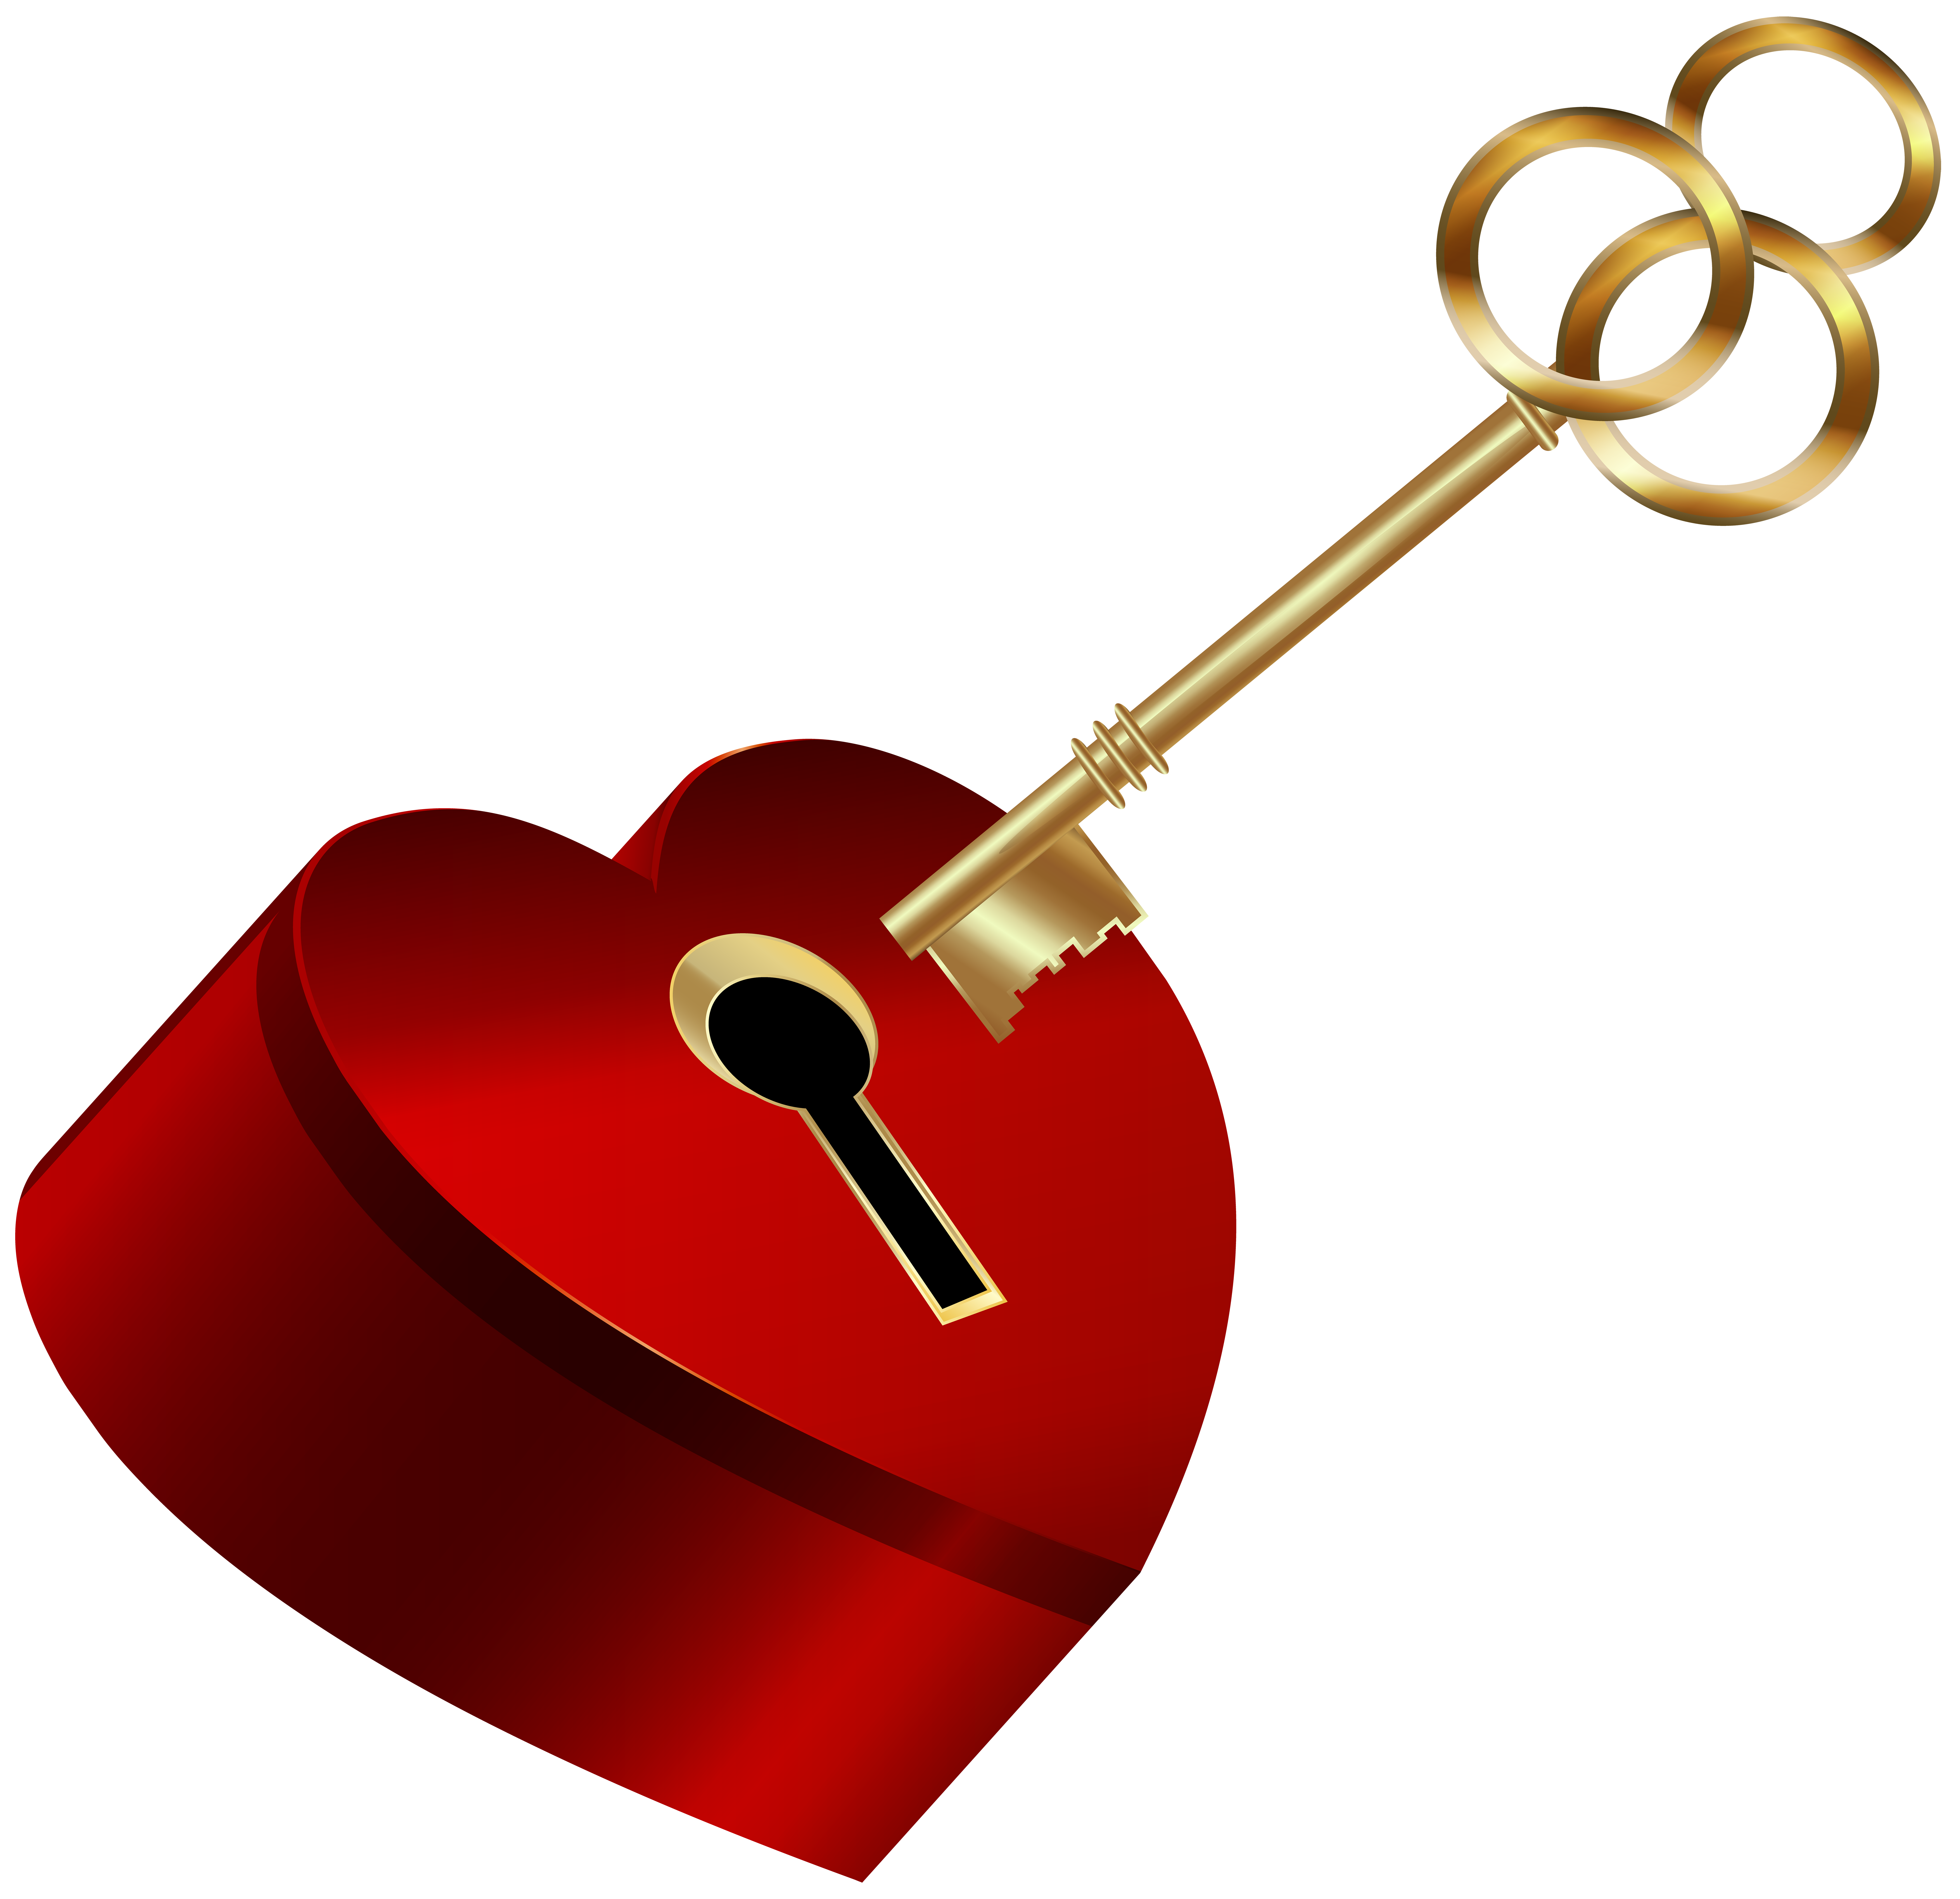 Heart with Key PNG Clip Art Image